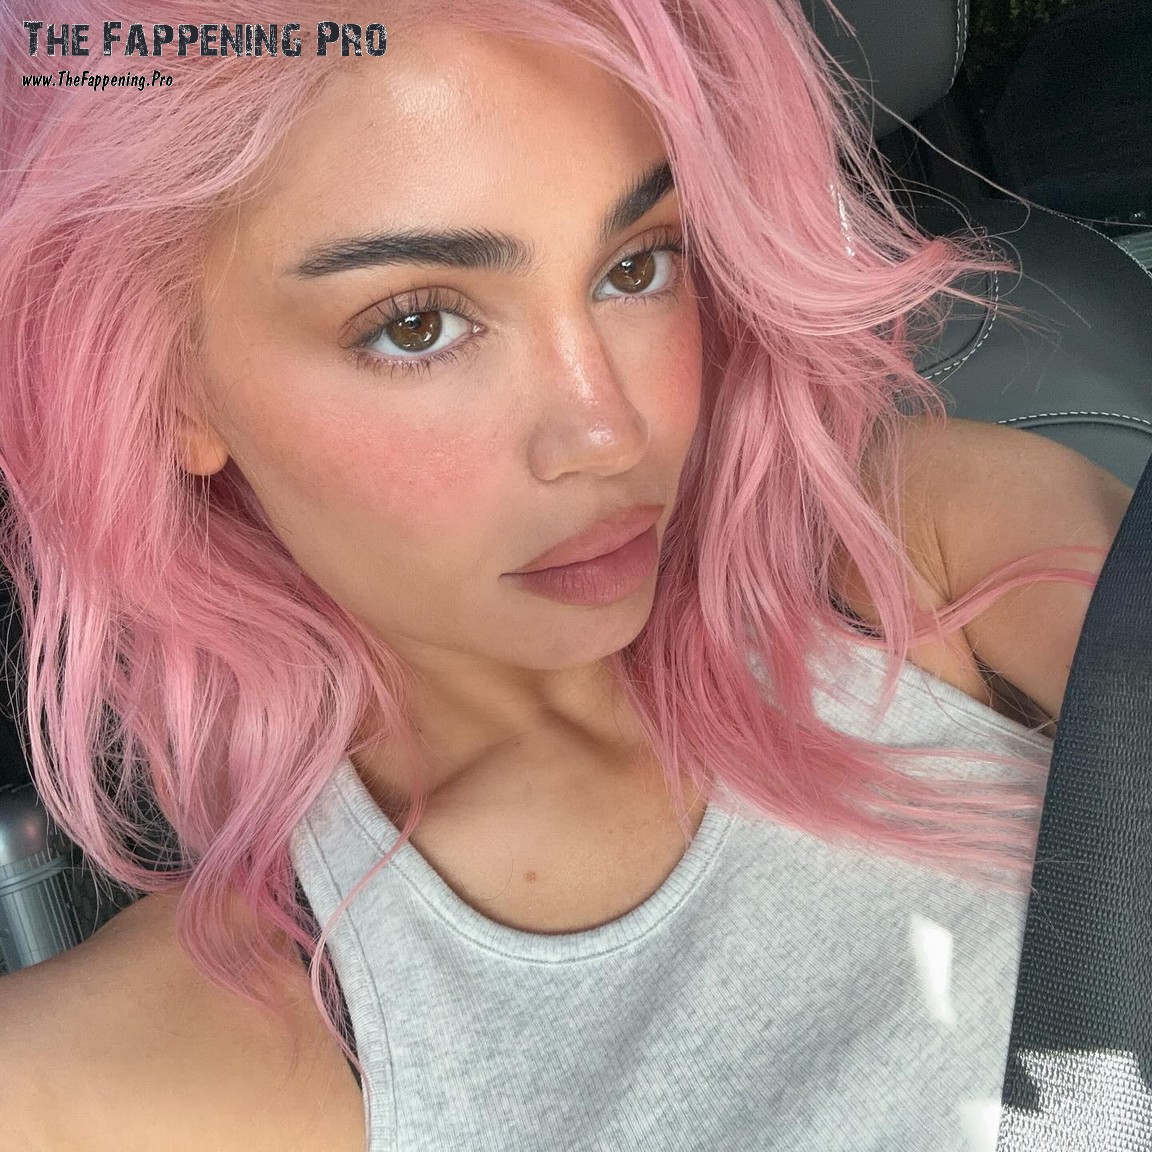 Get ready to be shocked by the latest transformation of Kylie Jenner! The 26-year-old brunette has surprised her fans by sporting a stunning pink hair look in a series of jaw-dropping selfies. With a touch of freckles on her face, she exudes a youthful and sexy vibe that has everyone talking. Fans couldn't contain their excitement and flooded her social media with enthusiastic comments. Will this daring new style be a permanent change for Kylie? Stay tuned for more sizzling updates from the style icon!